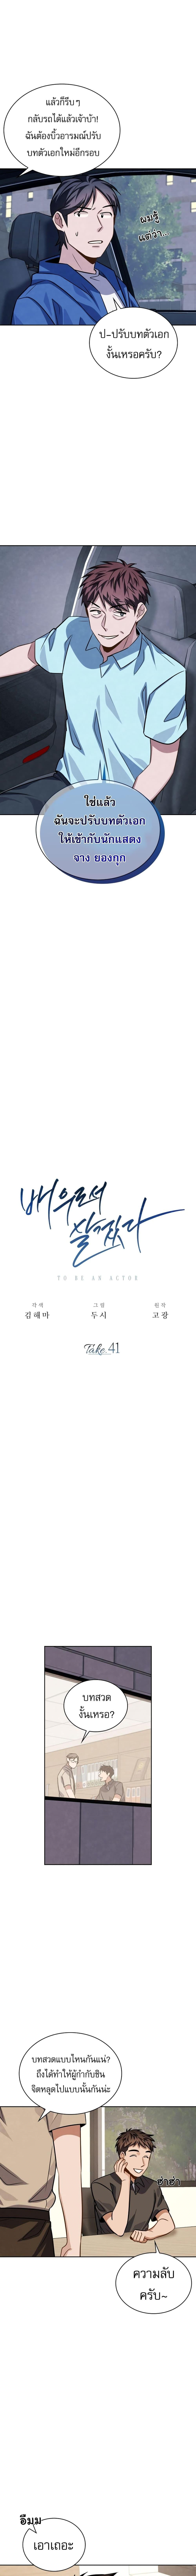 Be the Actor 41 03